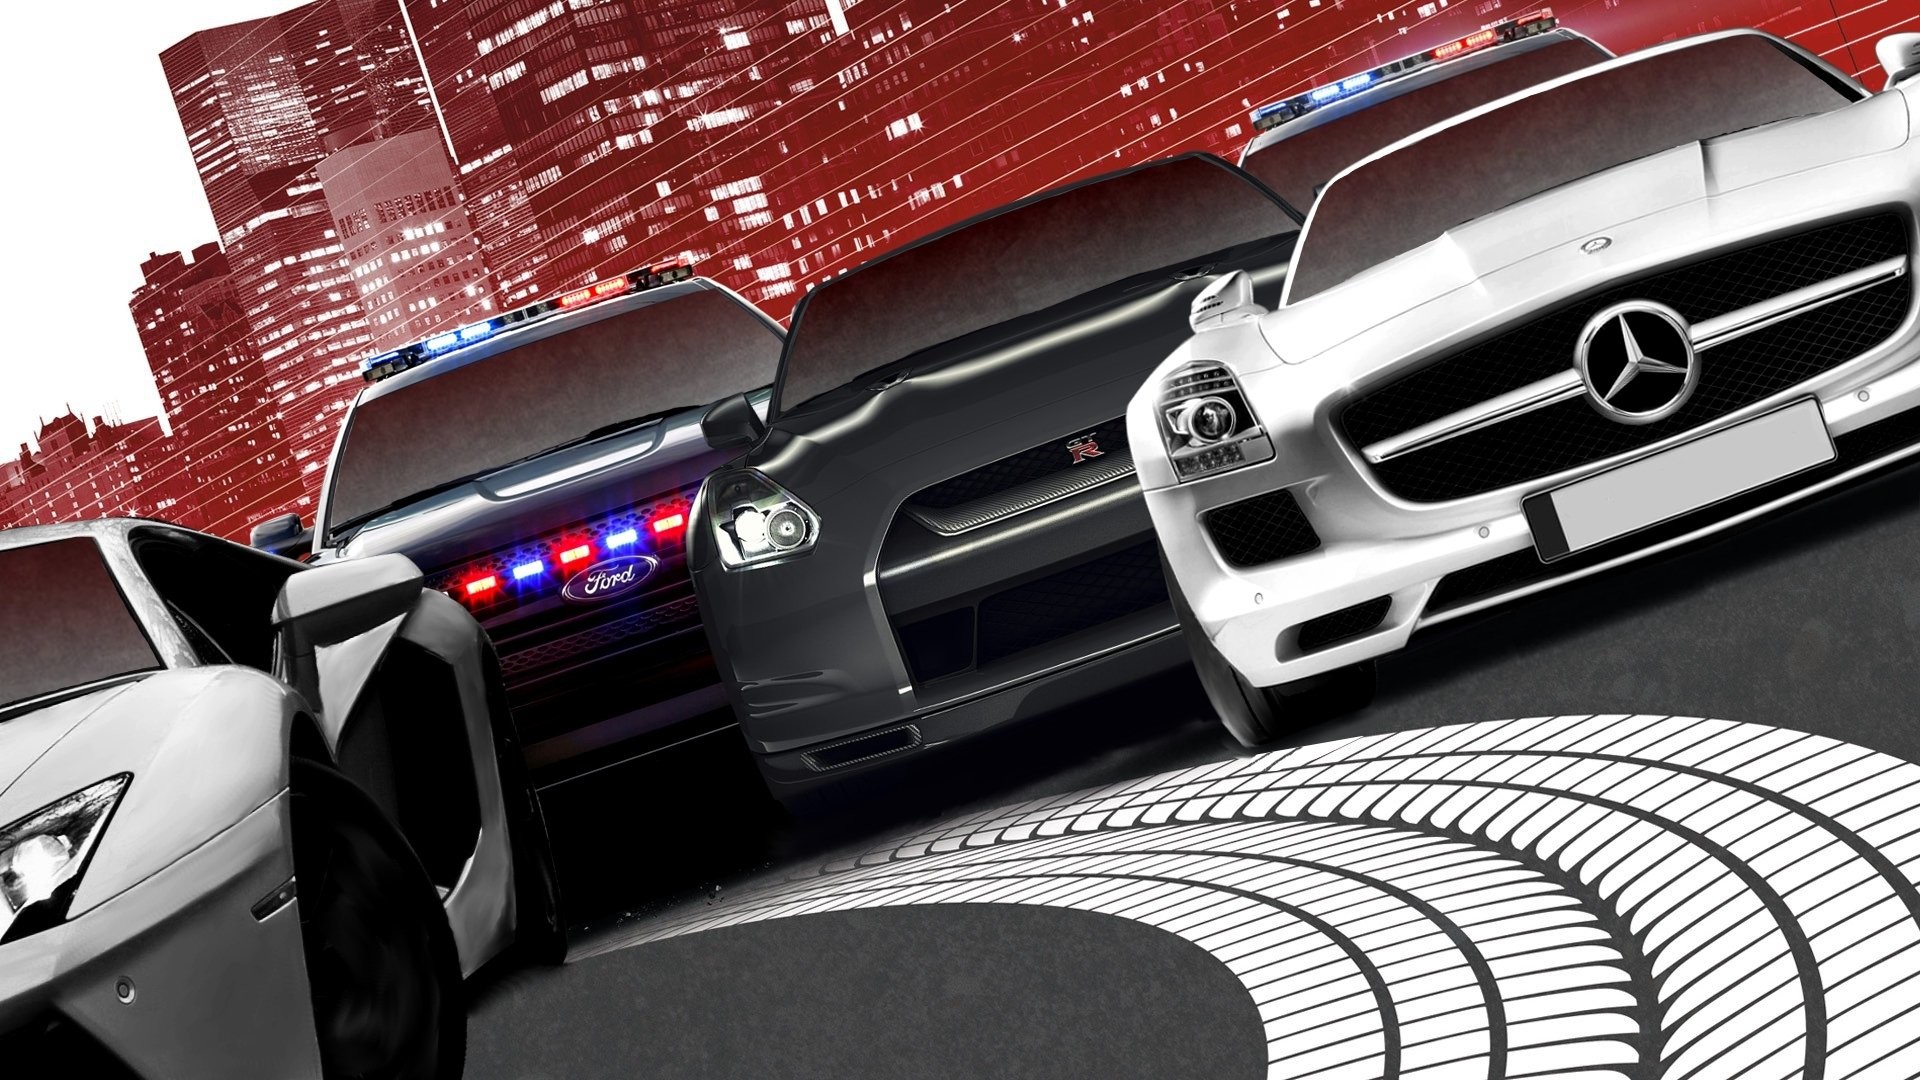 Need for Speed Most Wanted Wallpaper (76+ pictures)